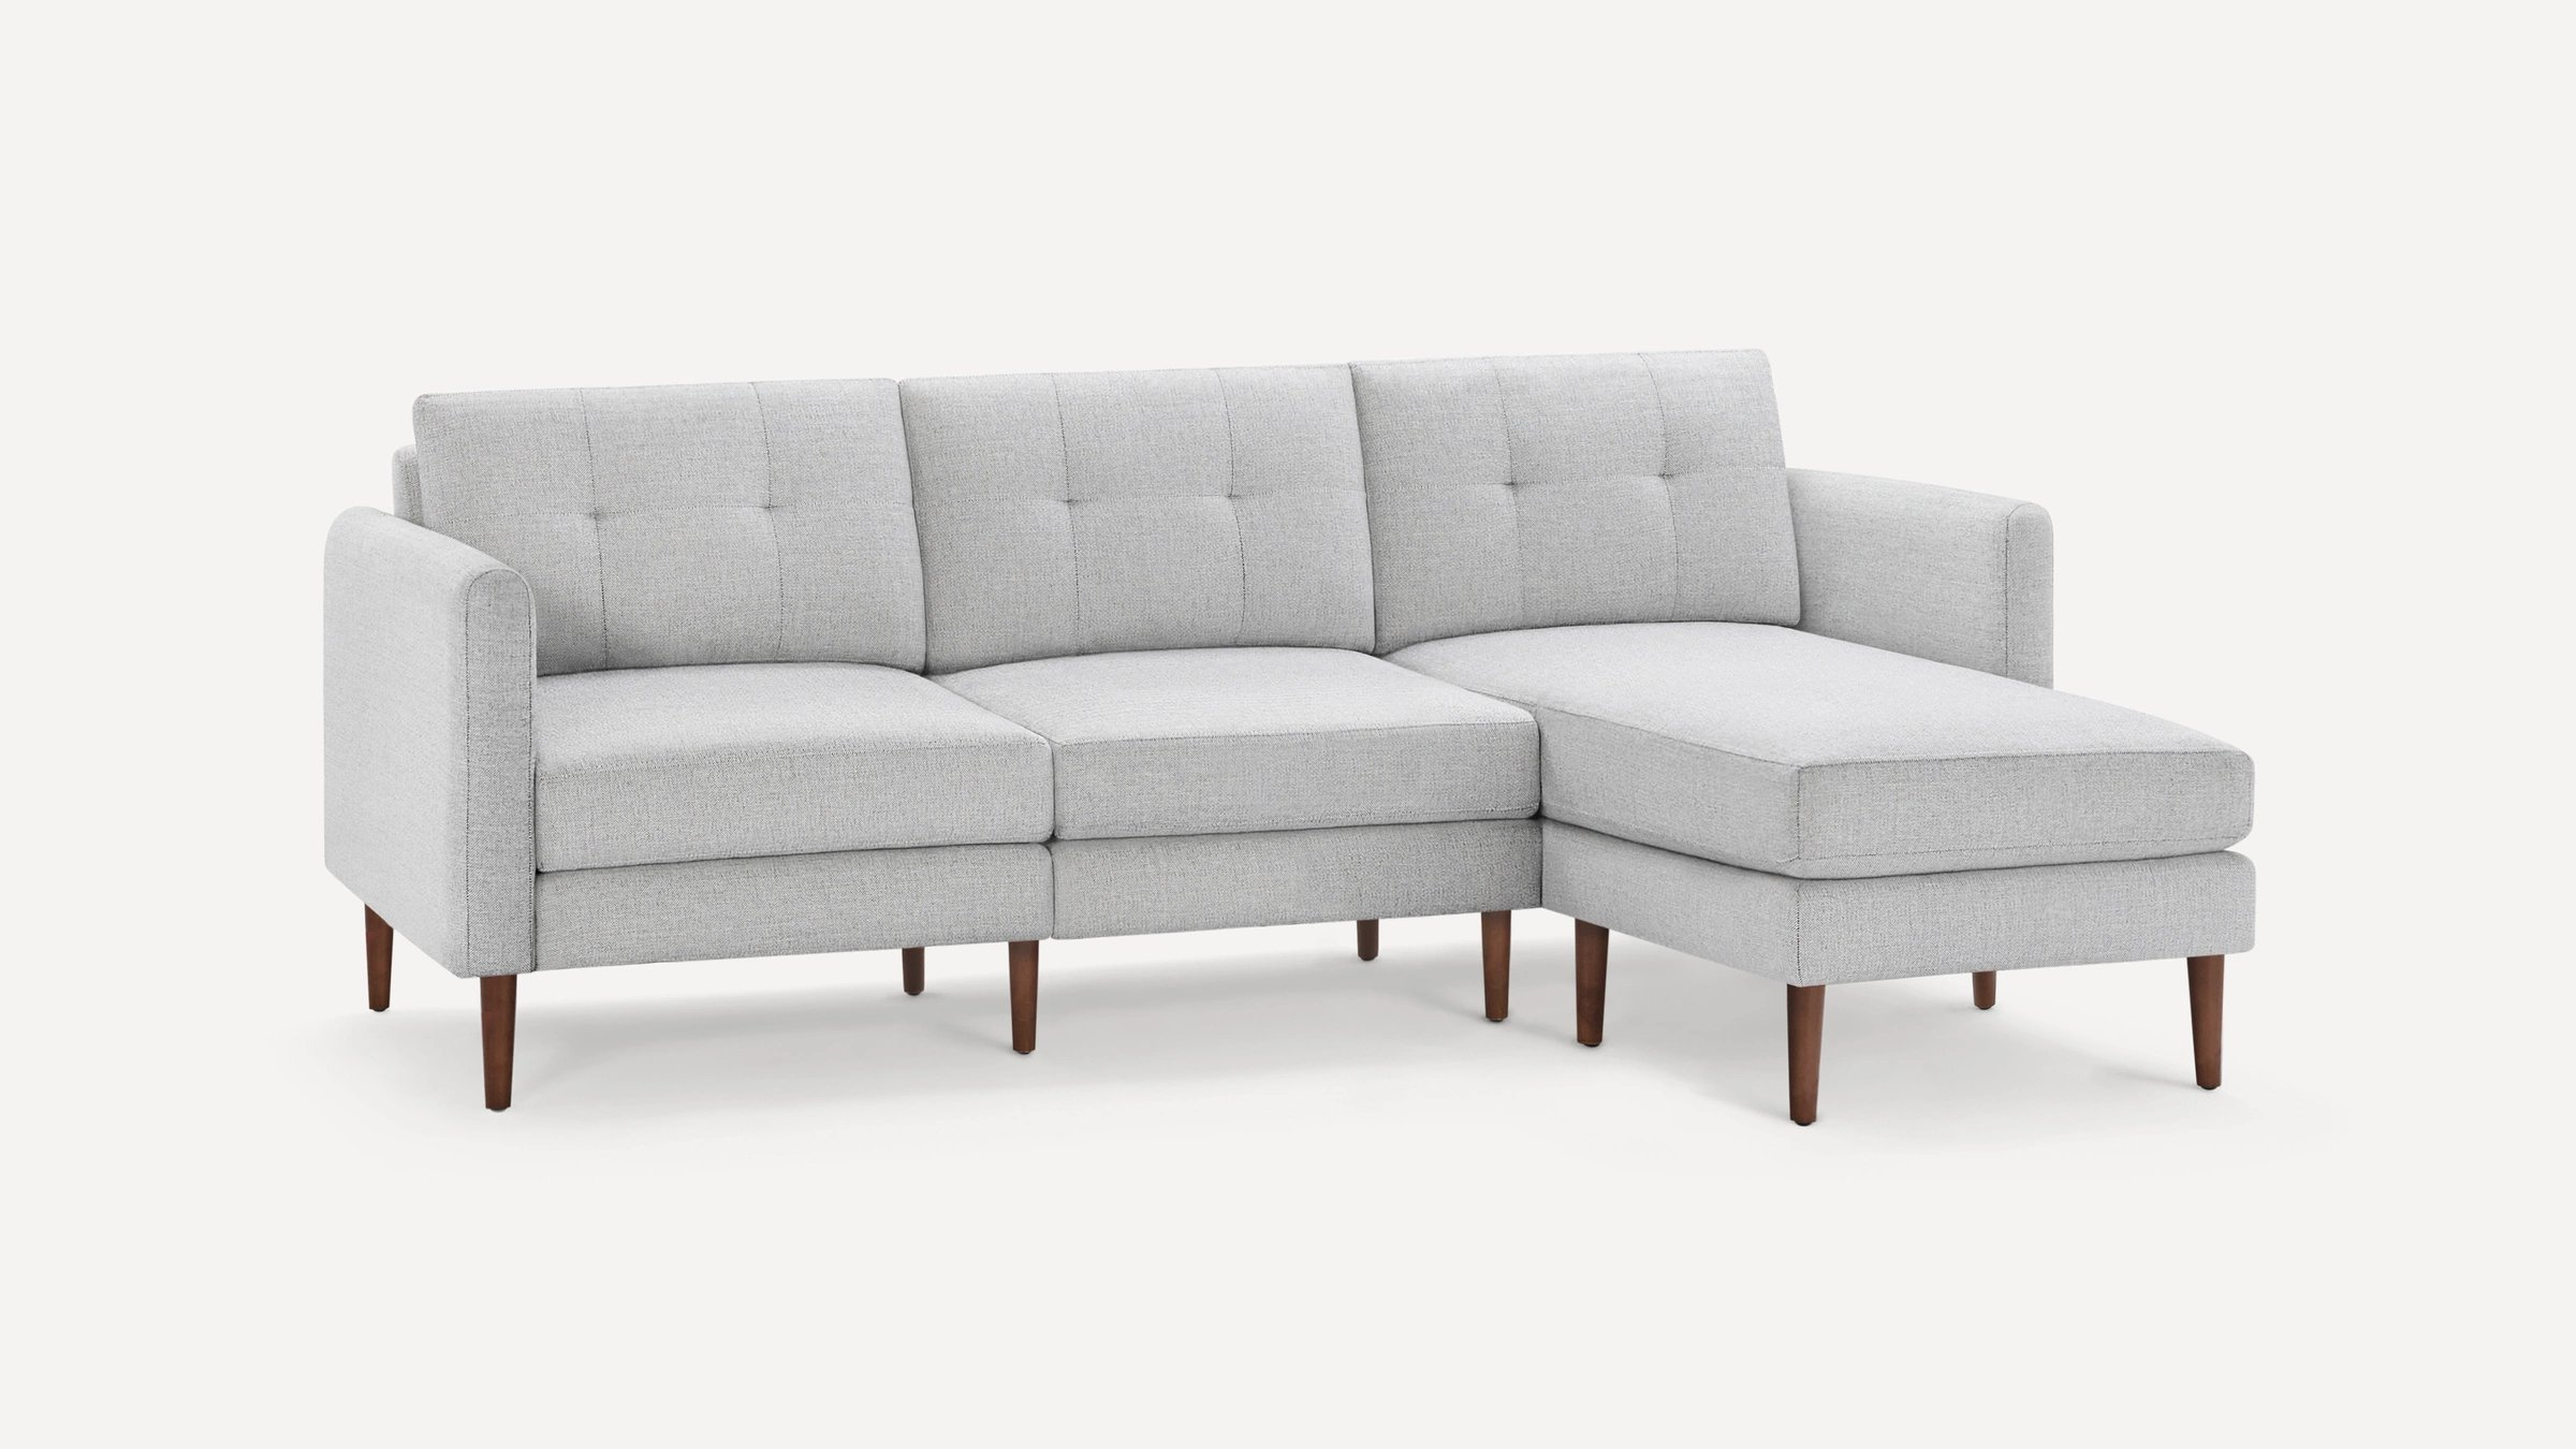 Arch Nomad Sofa Sectional - Walnut legs - Arch arms - Moveable chaise - Burrow